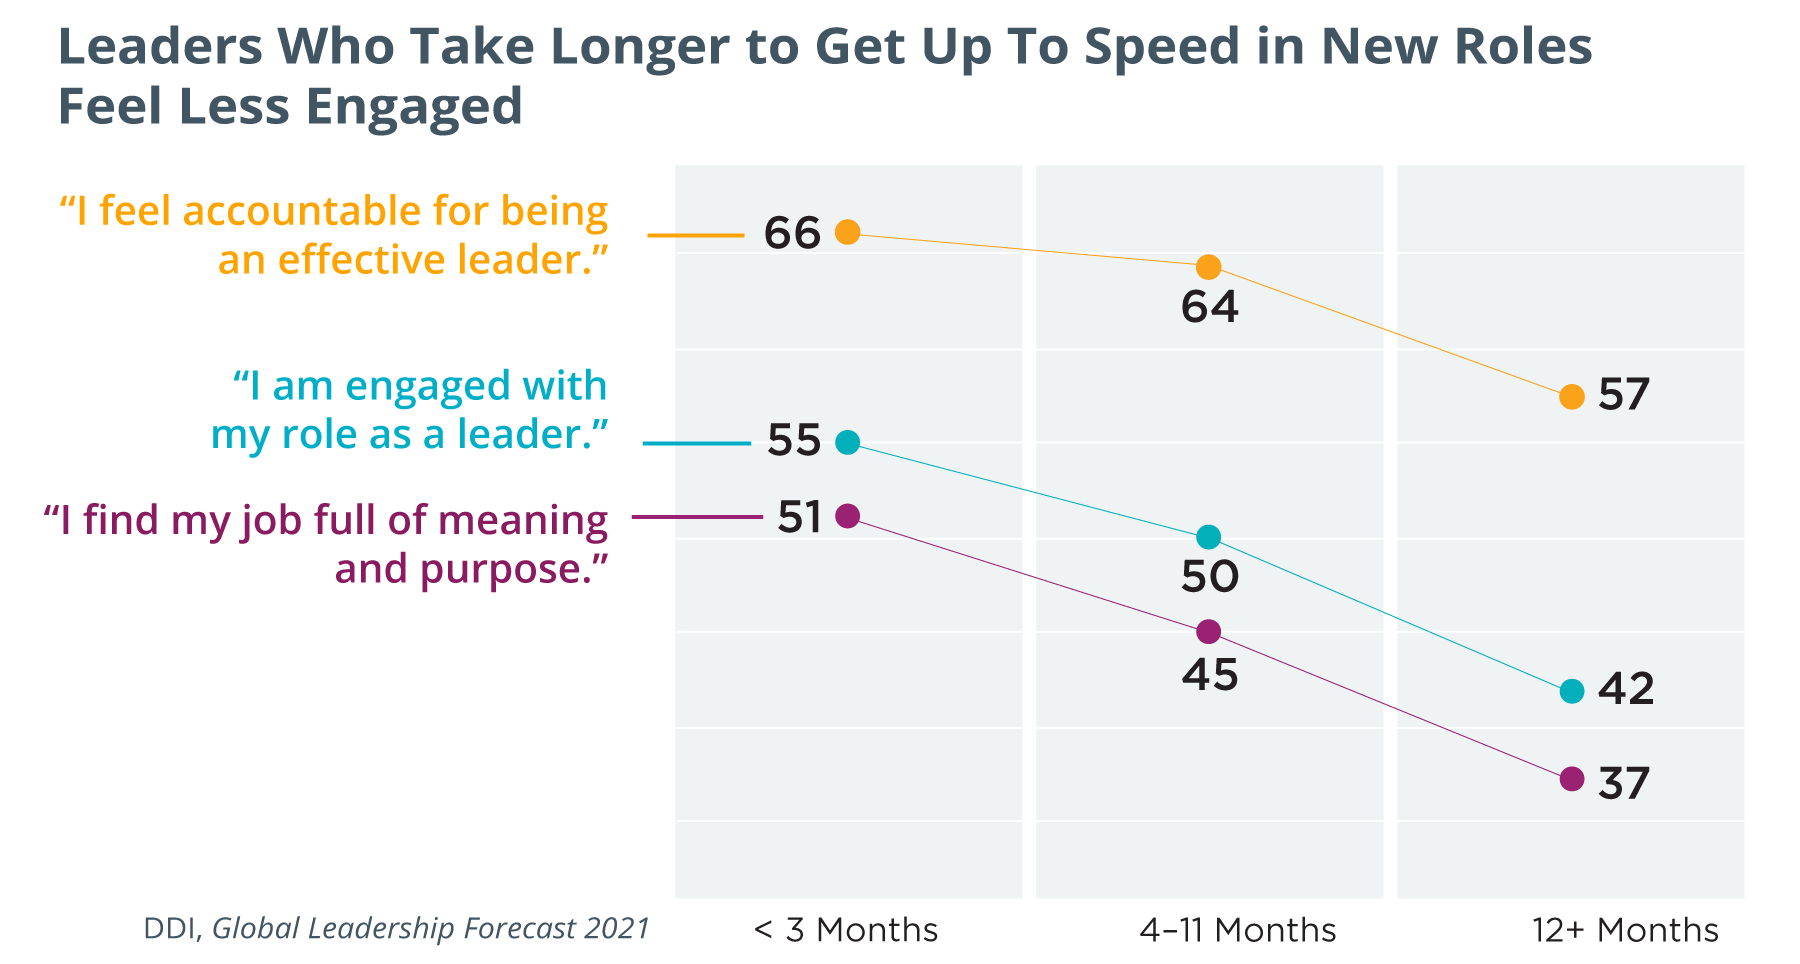 line graph showing various sentiments, “I feel accountable for being an effective leader.”, “I am engaged with my role as a leader.”, and “I find my job full of meaning and purpose.” and the percentages of leaders who feel that way at the following time intervals: after fewer than 3 months on the job, between 4-11 months on the job, and after 12+ months on the job